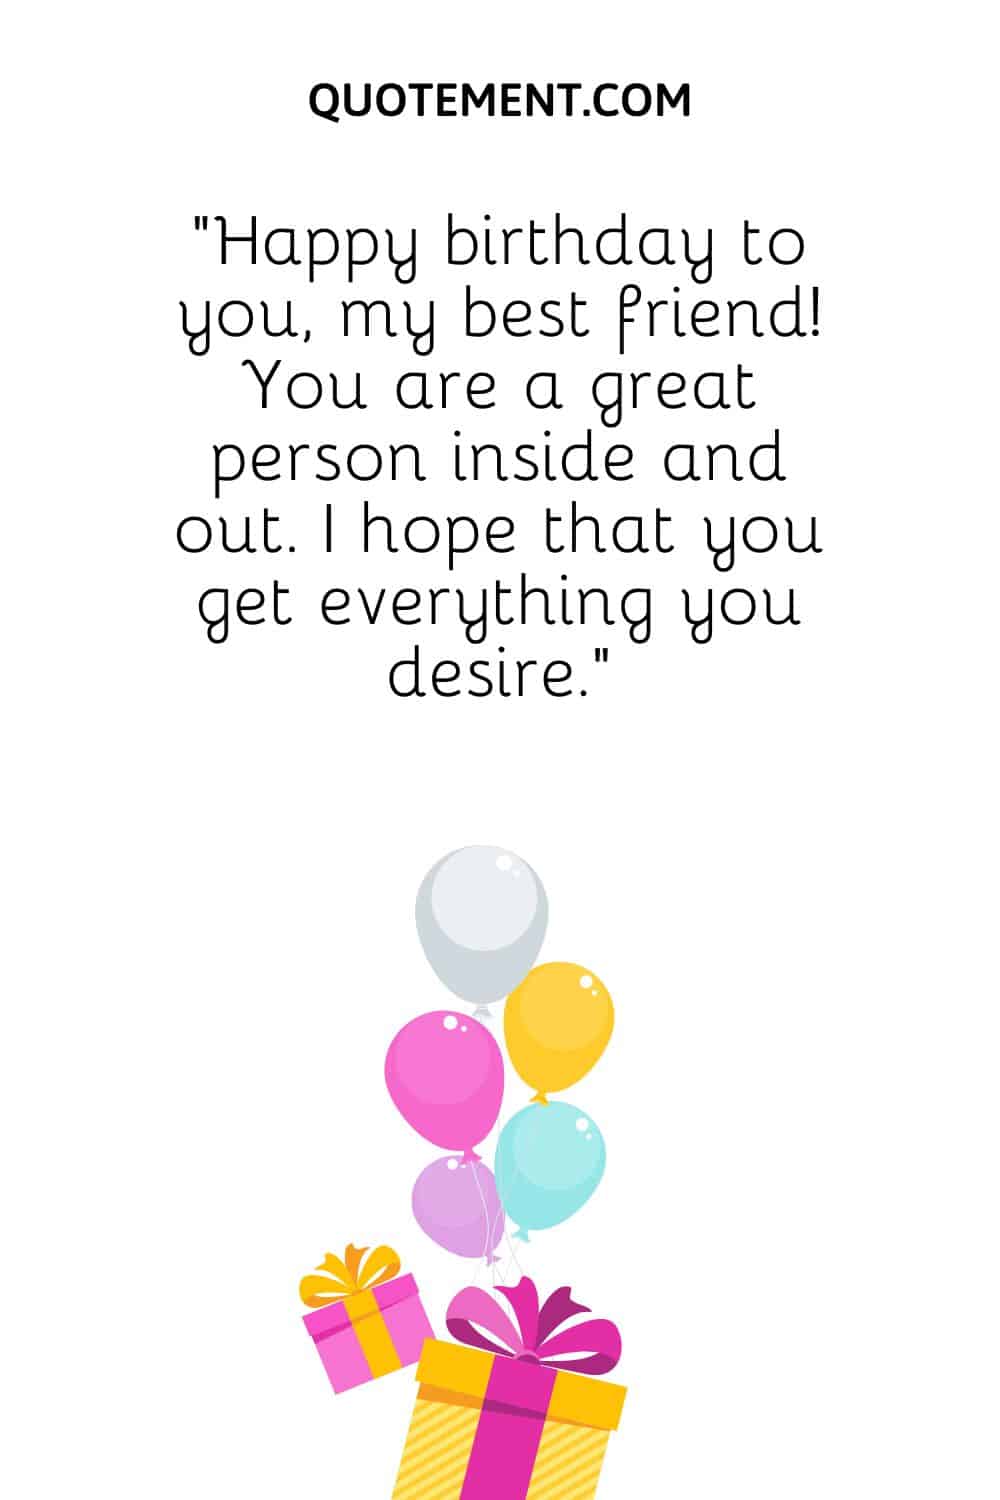 180 Heart Touching Birthday Wishes For Friend You Adore